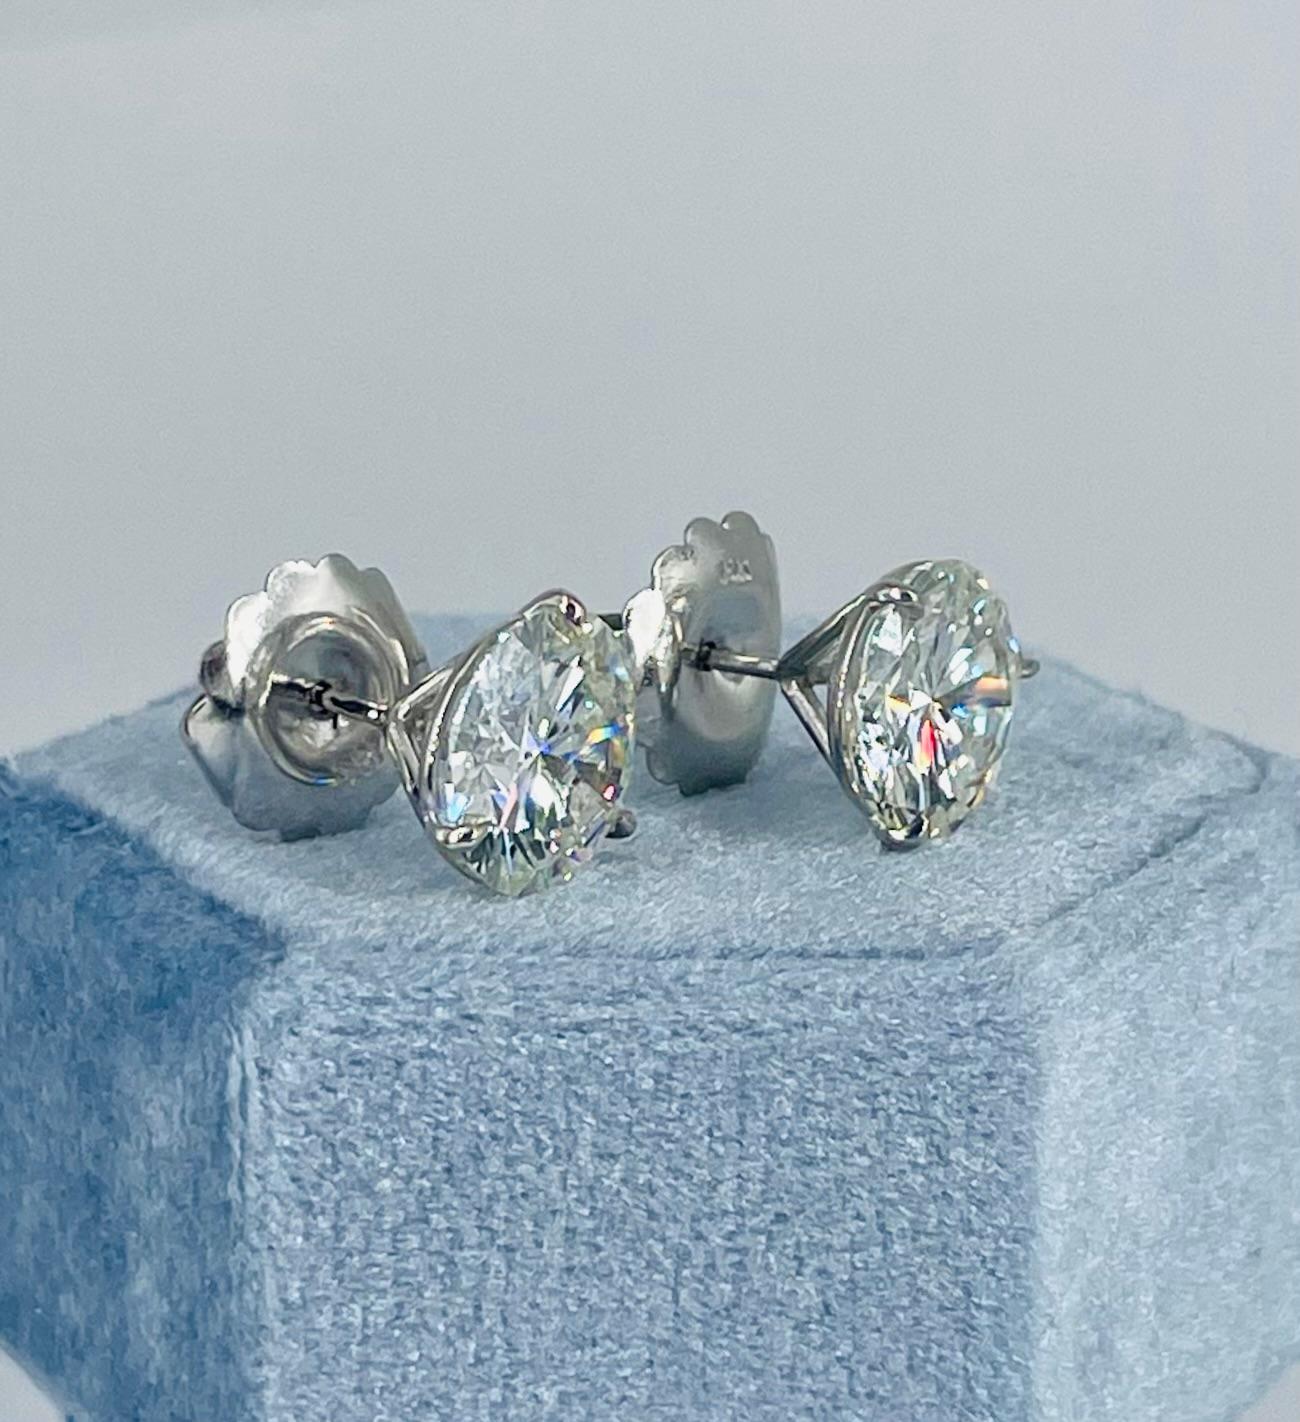 Stunning for every day wear or a special occasion, these studs are a showstopper! This beautifully matched pair of sparkling round diamonds is certified by GIA as I color and SI2 clarity, one weighing 3.13 carats and the other 3.05 carats, for a